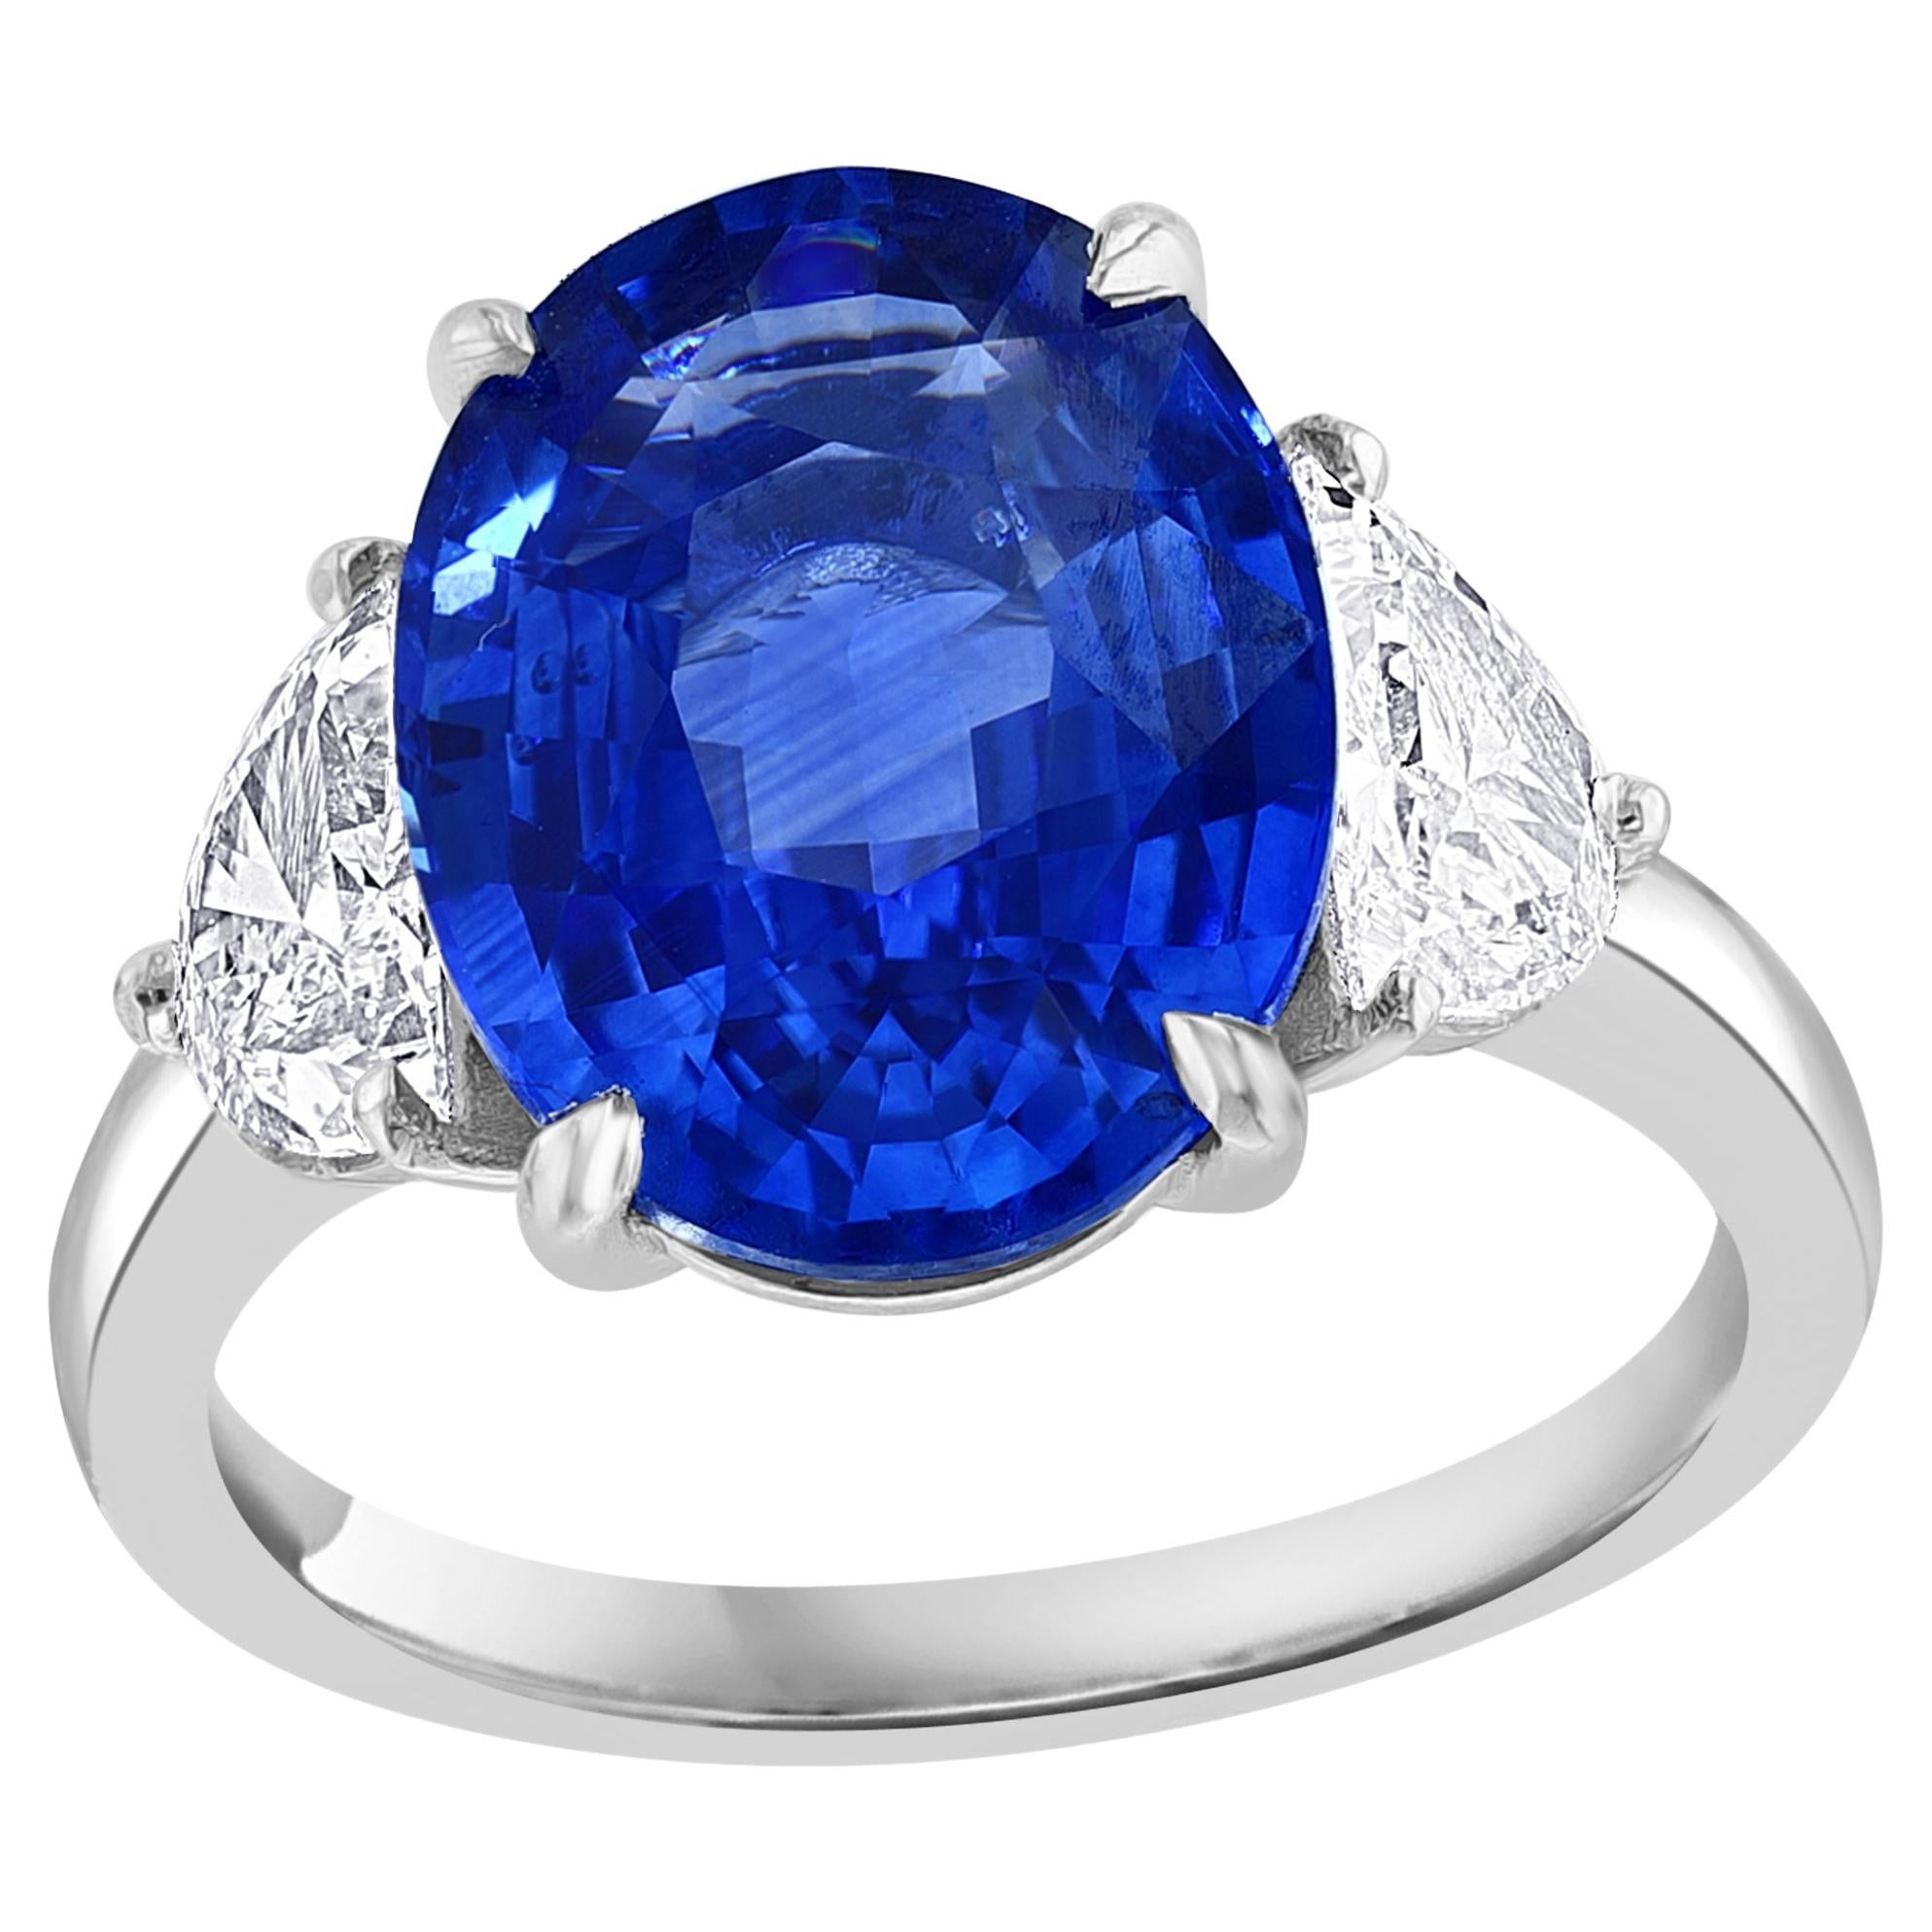 5.96 Carat Oval Blue Sapphire Diamond Three-Stone Engagement Ring in Platinum For Sale